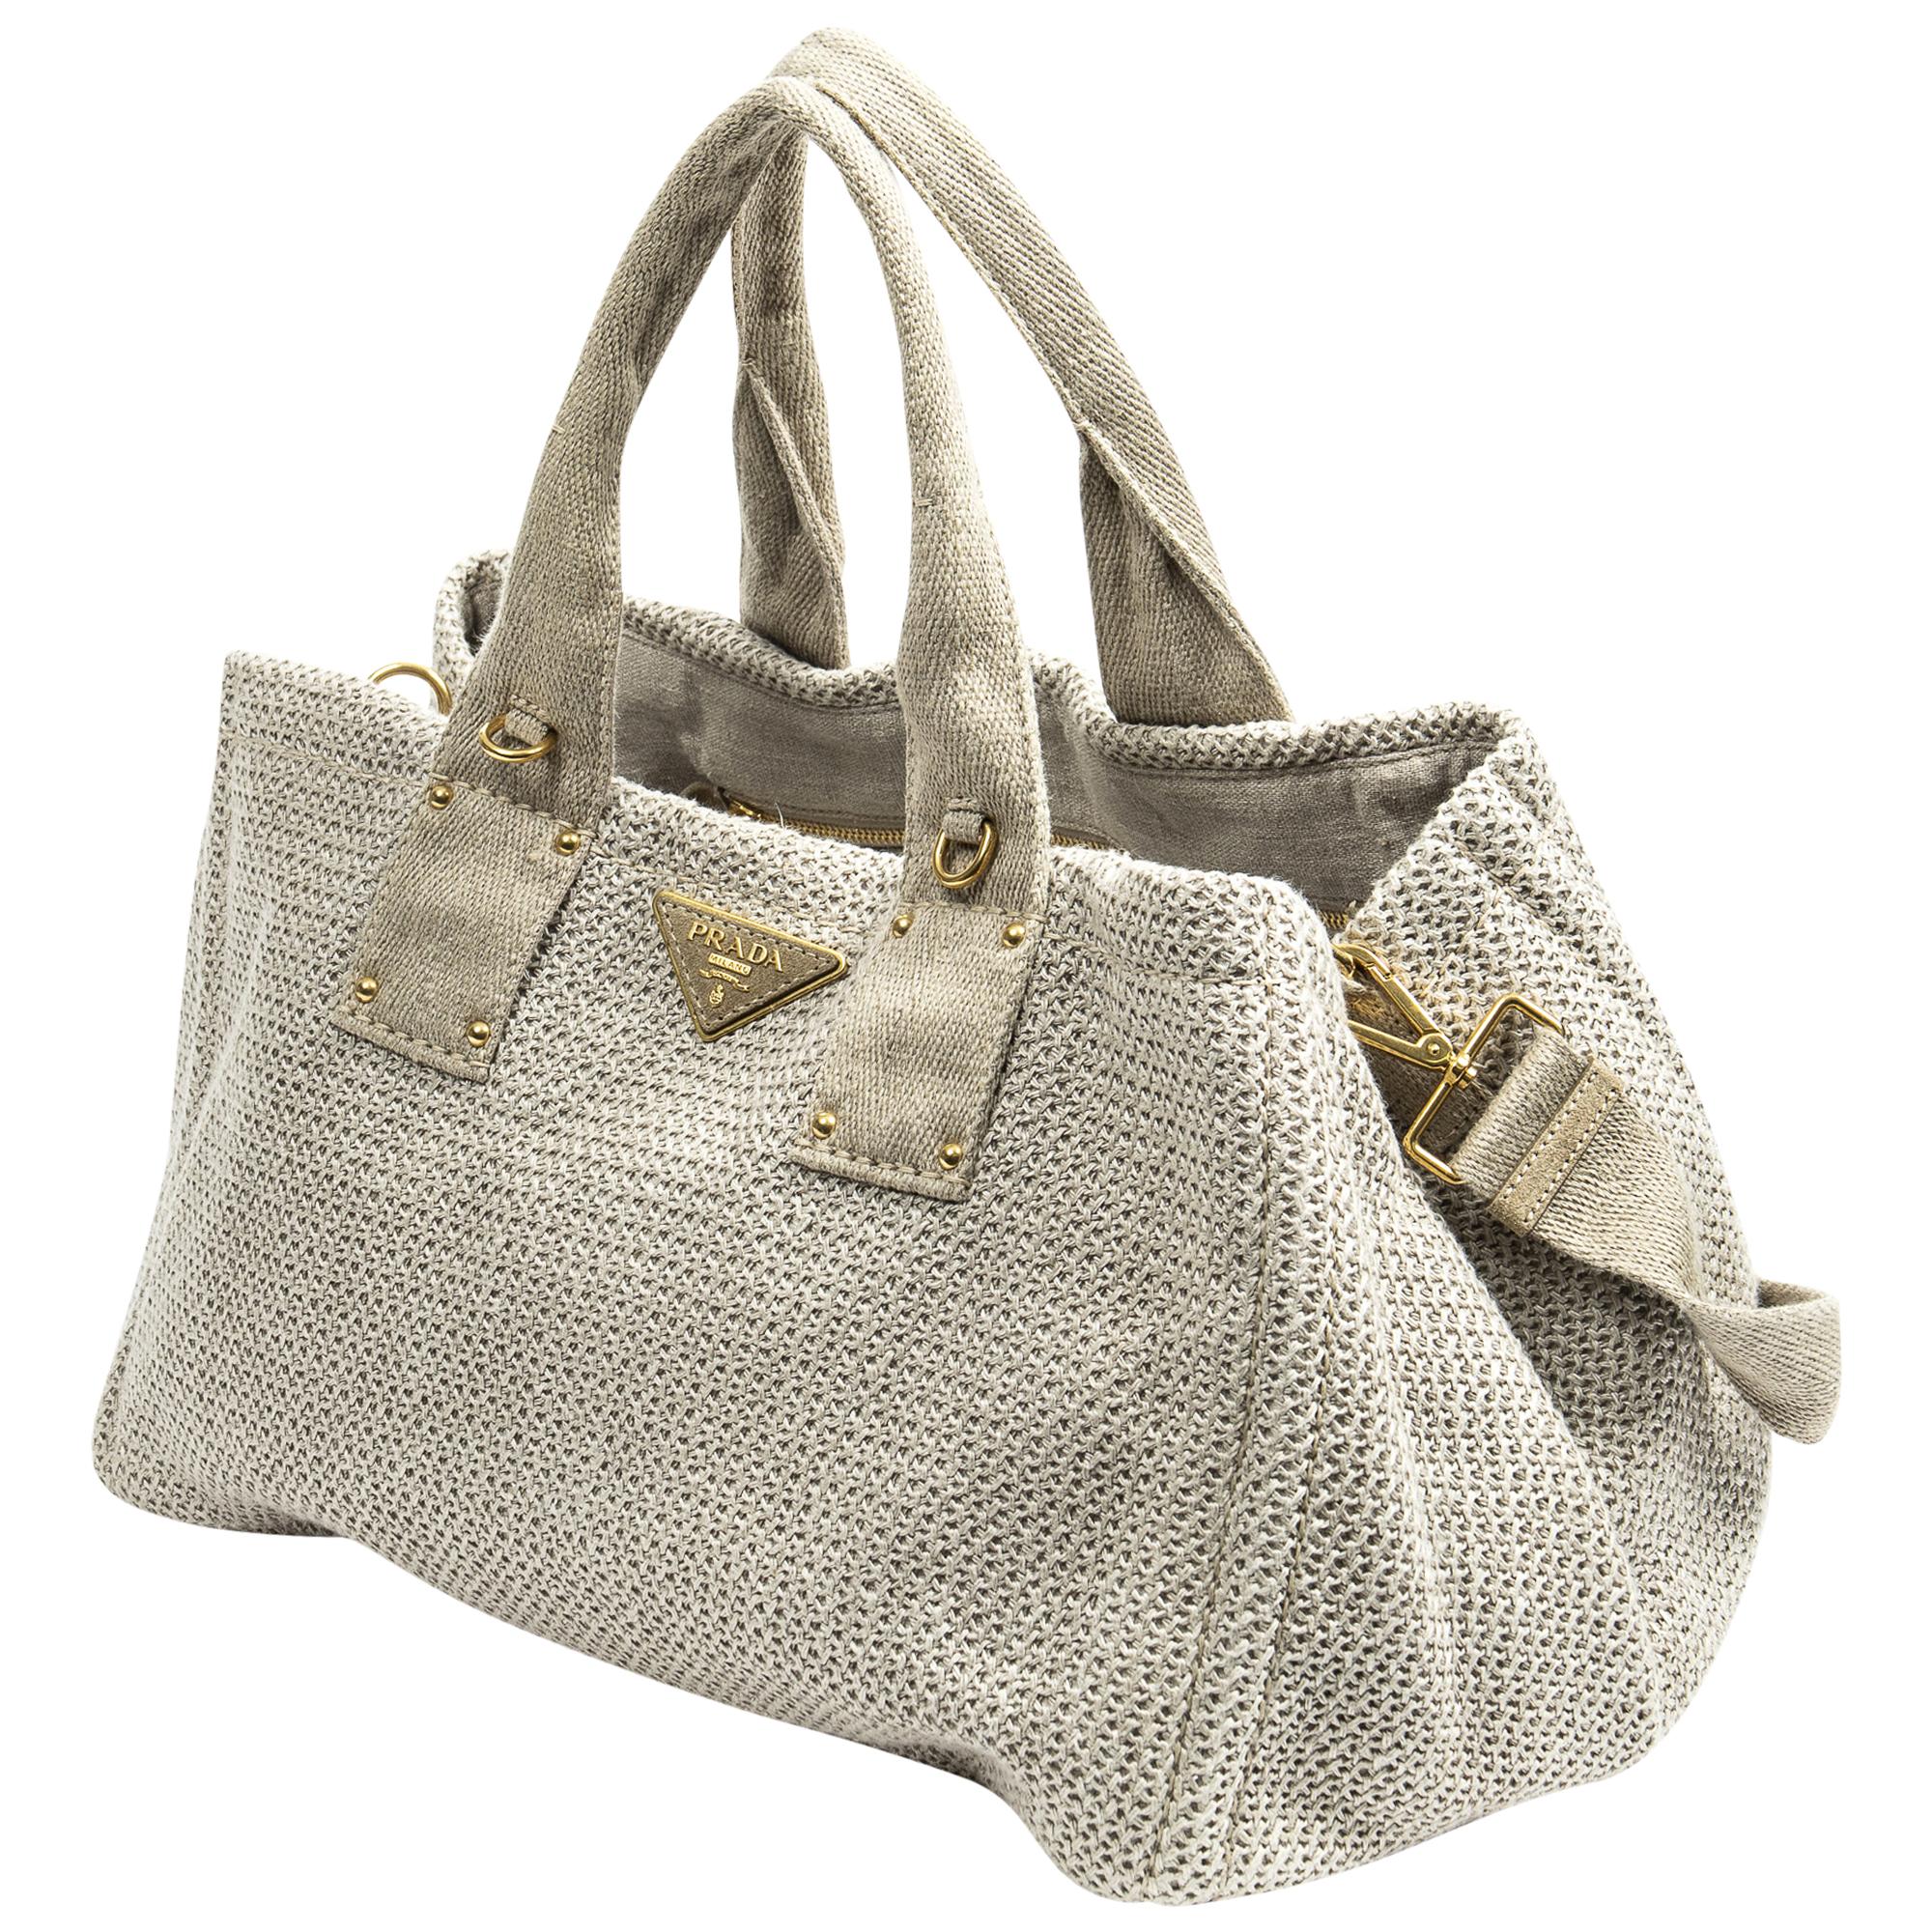 Elevate your everyday ensemble with the Prada Beige Medium Woven Canapa Tote. Crafted from durable canvas in a timeless beige hue, it exudes understated sophistication. Adorned with gold-tone hardware and featuring an open-top design, its spacious